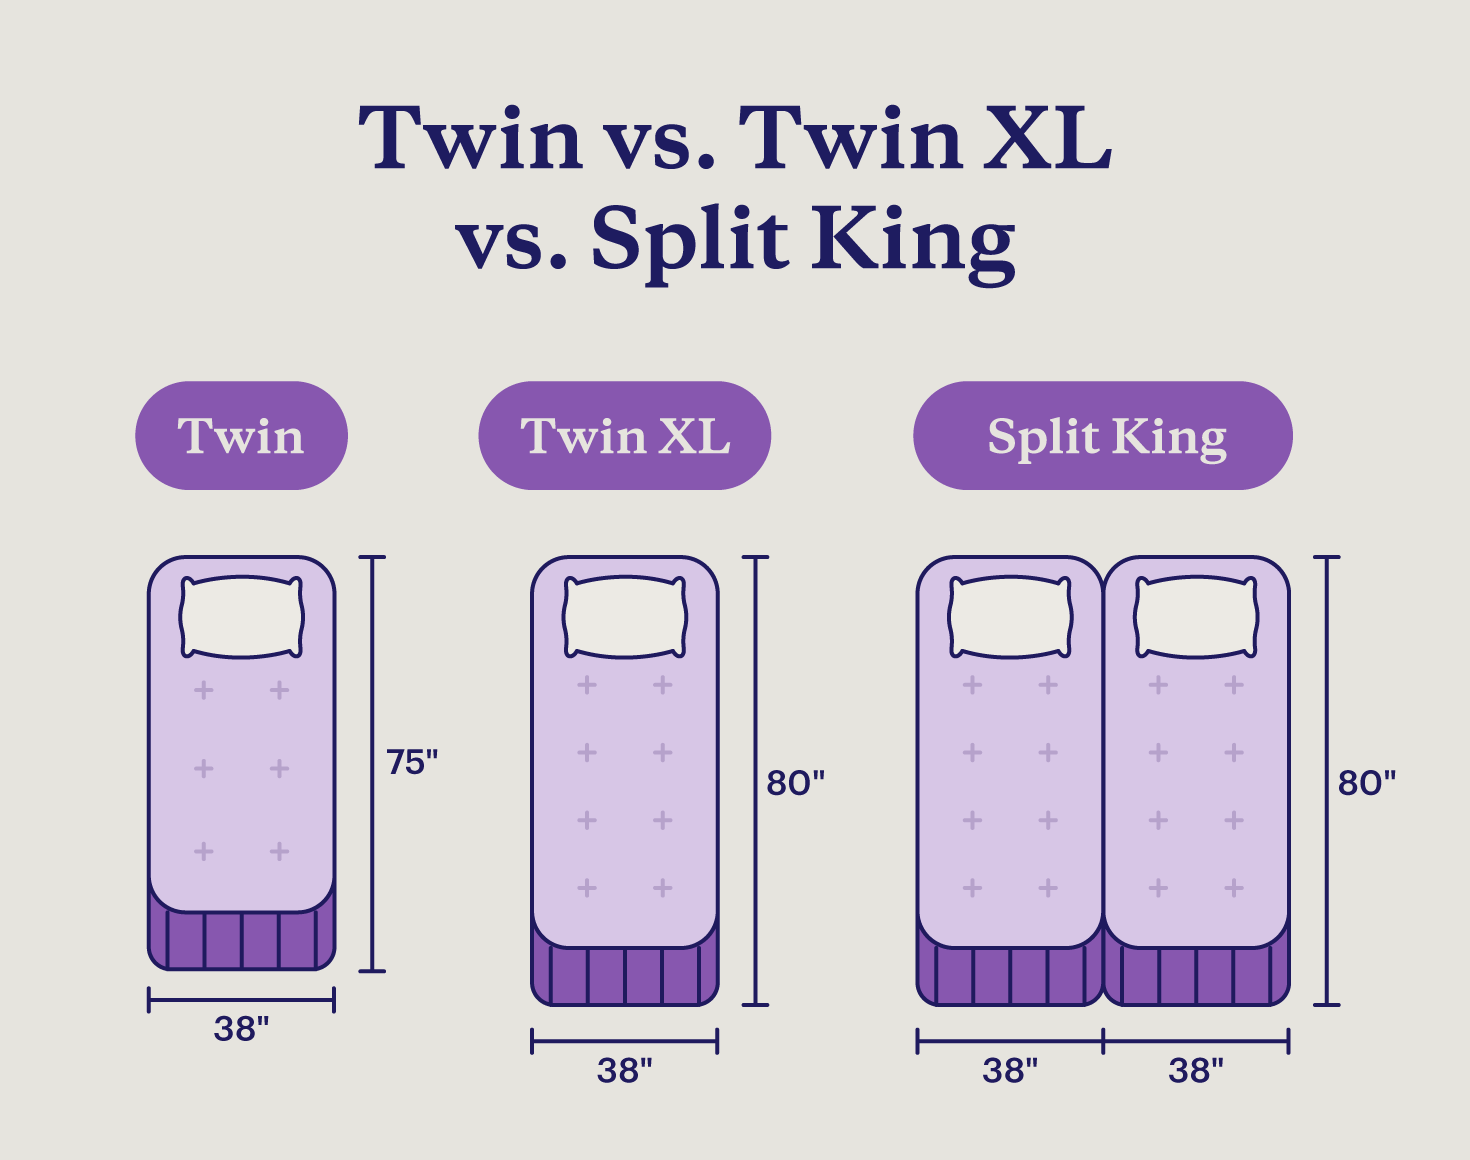 The difference in sizes between a twin, twin XL, and split king mattress.